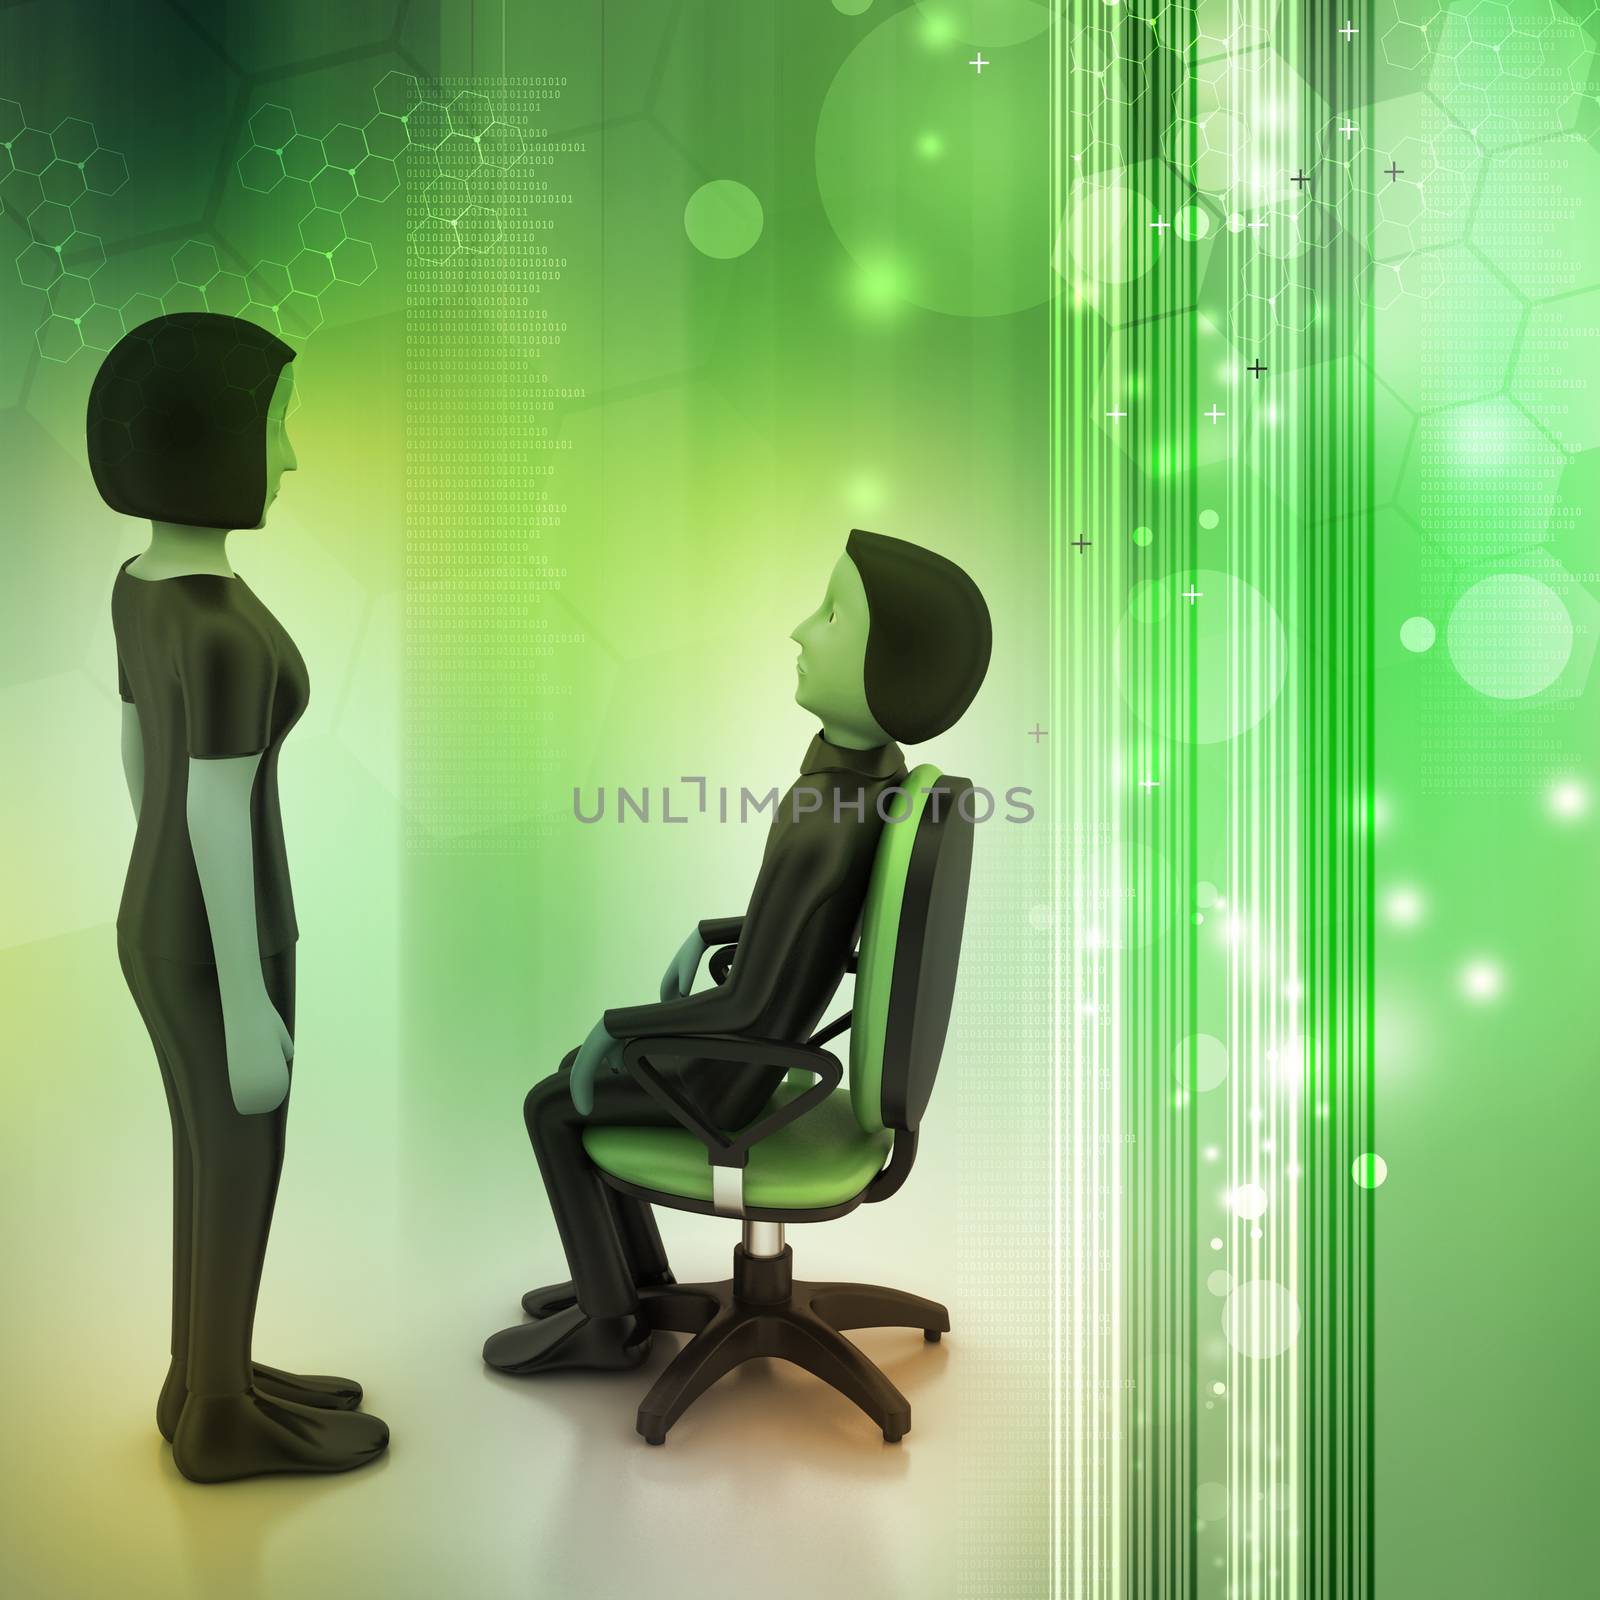 3d people in discussion  by rbhavana